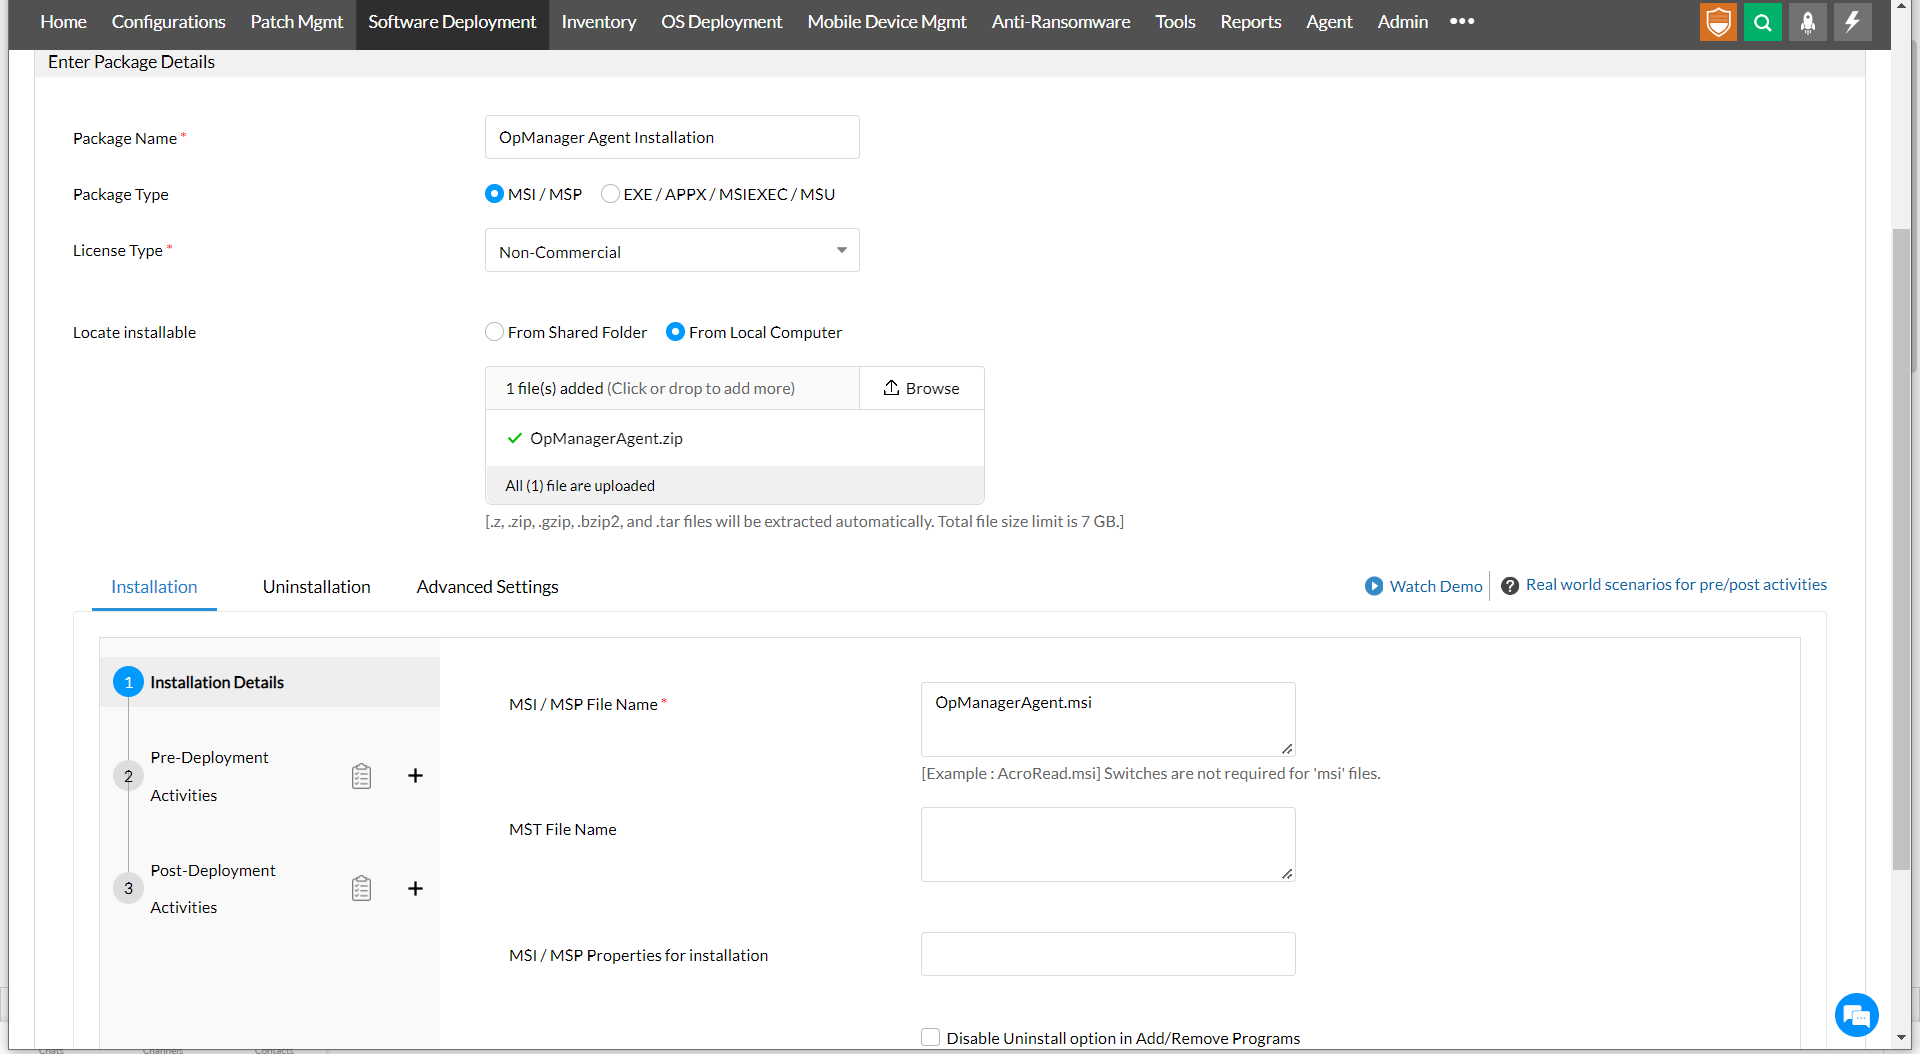 Deploying OpManager agents through Endpoint Central